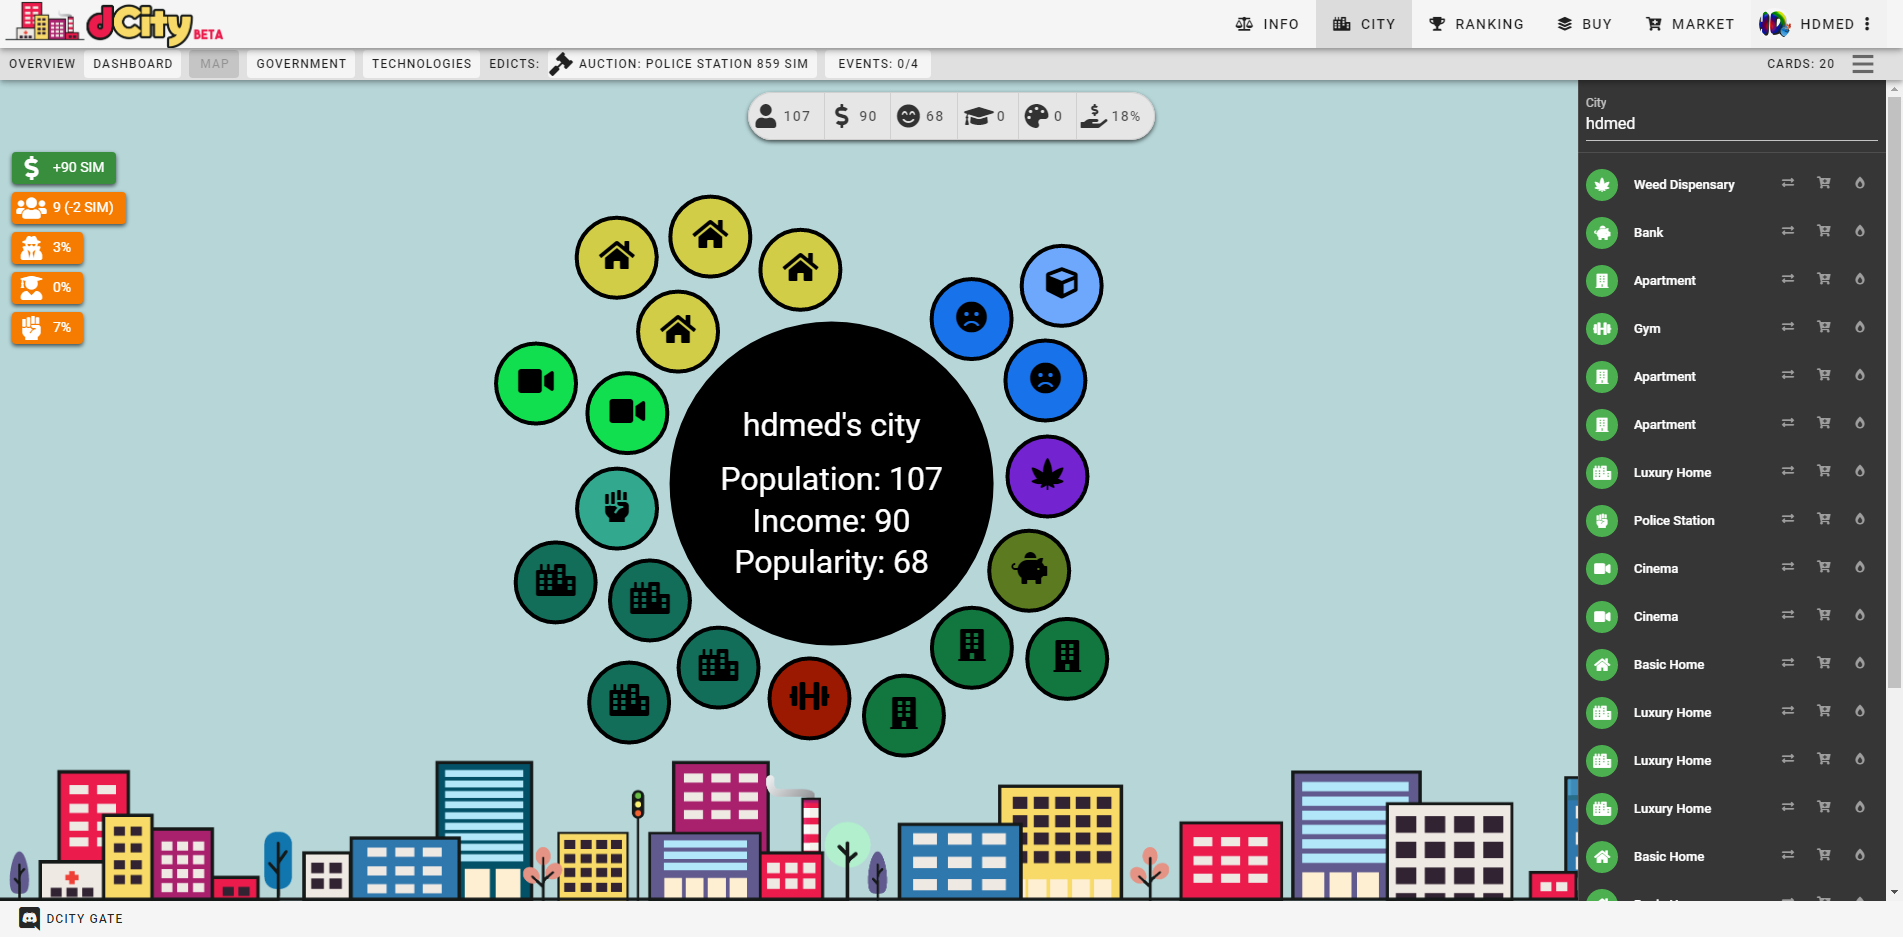 dCITY_io_City (2).png